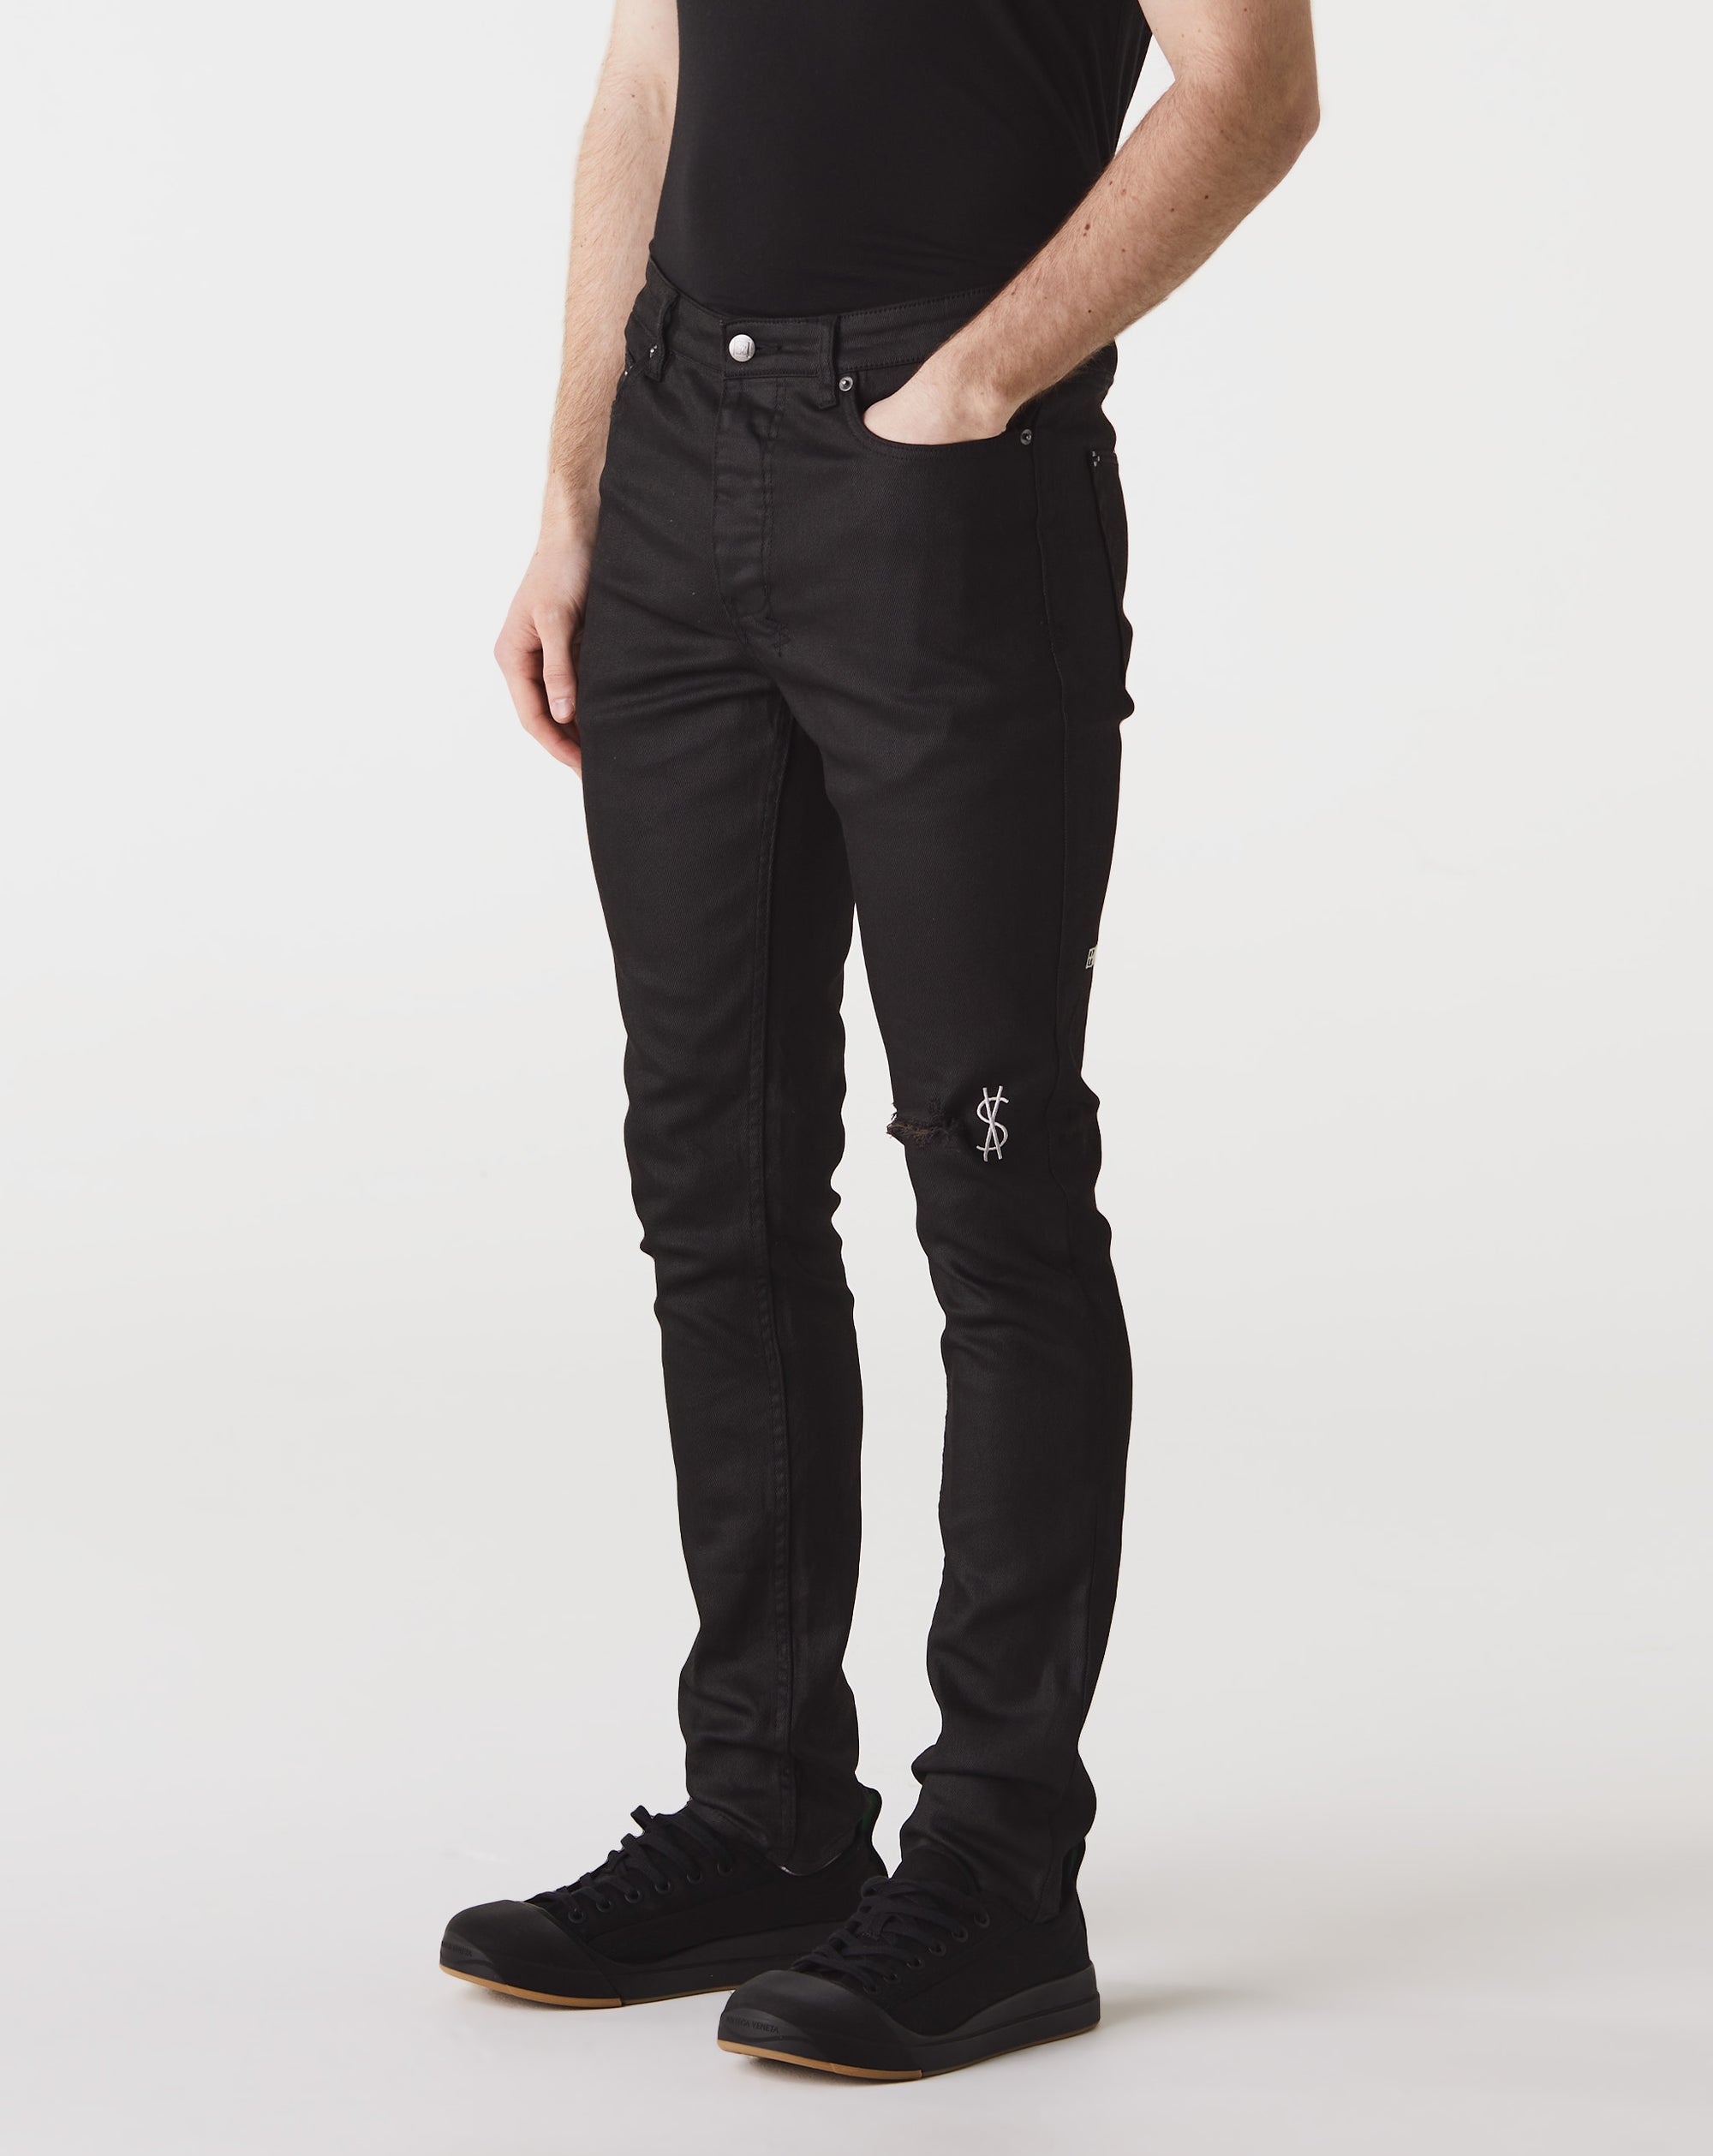 Ksubi Chitch Waxed Silver - Rule of Next Apparel